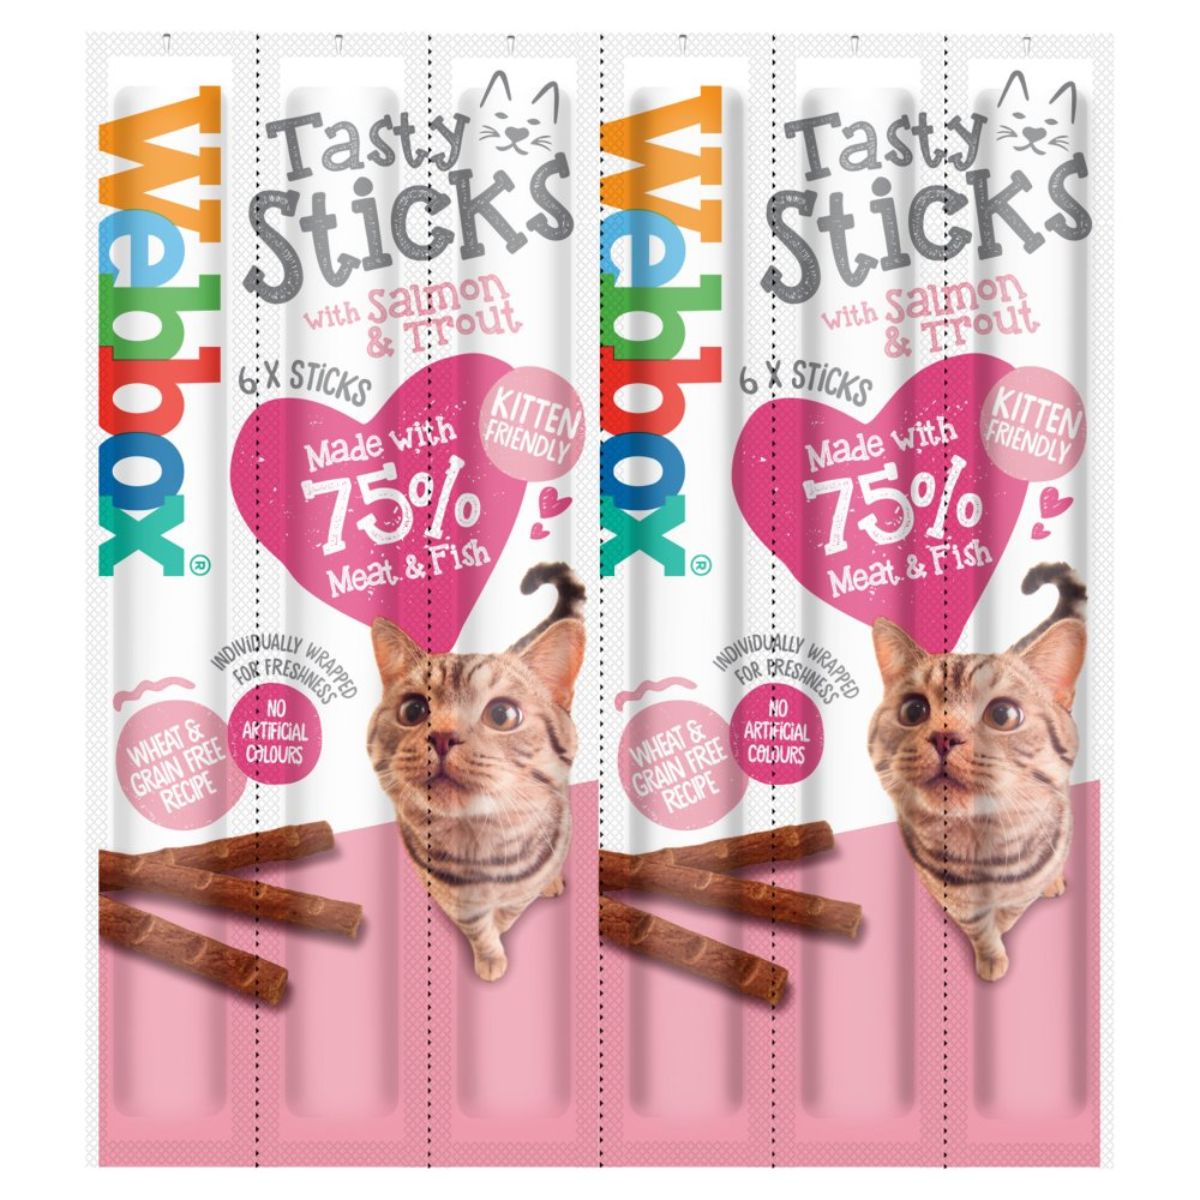 Two packages of Webbox - Cat Sticks Salmon Treats - 6 Sticks for cats.